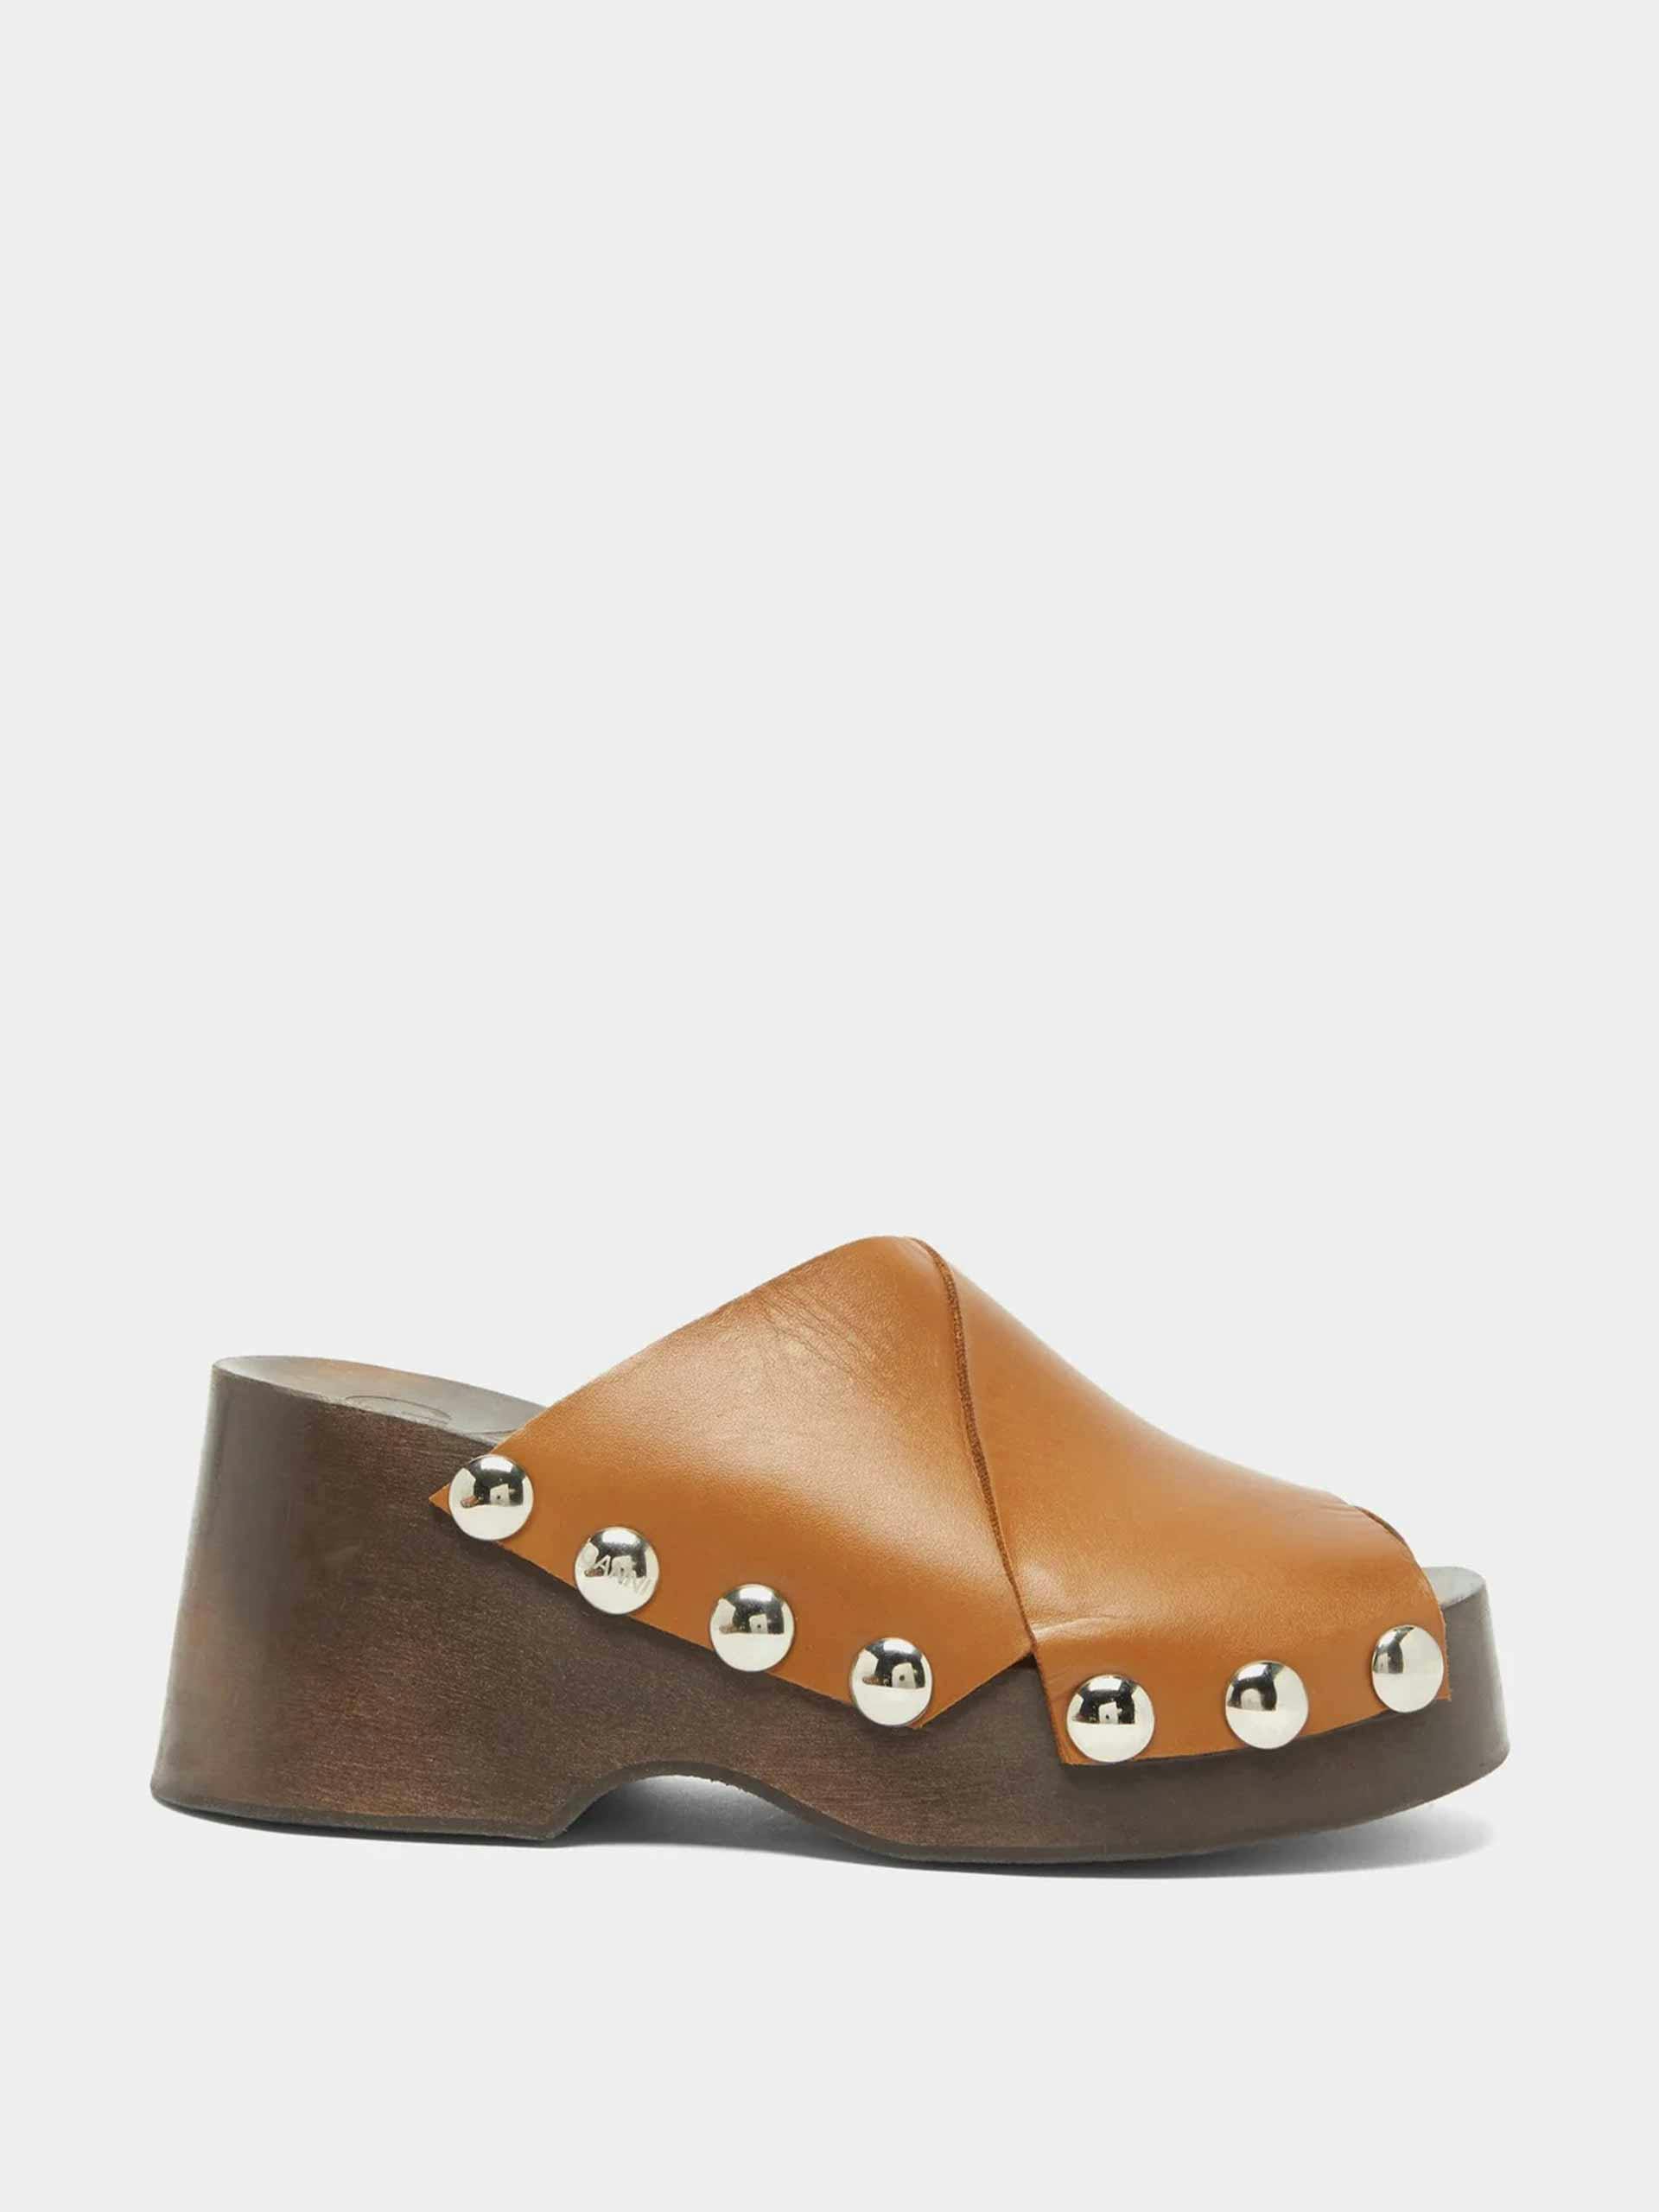 Brown studded leather clogs